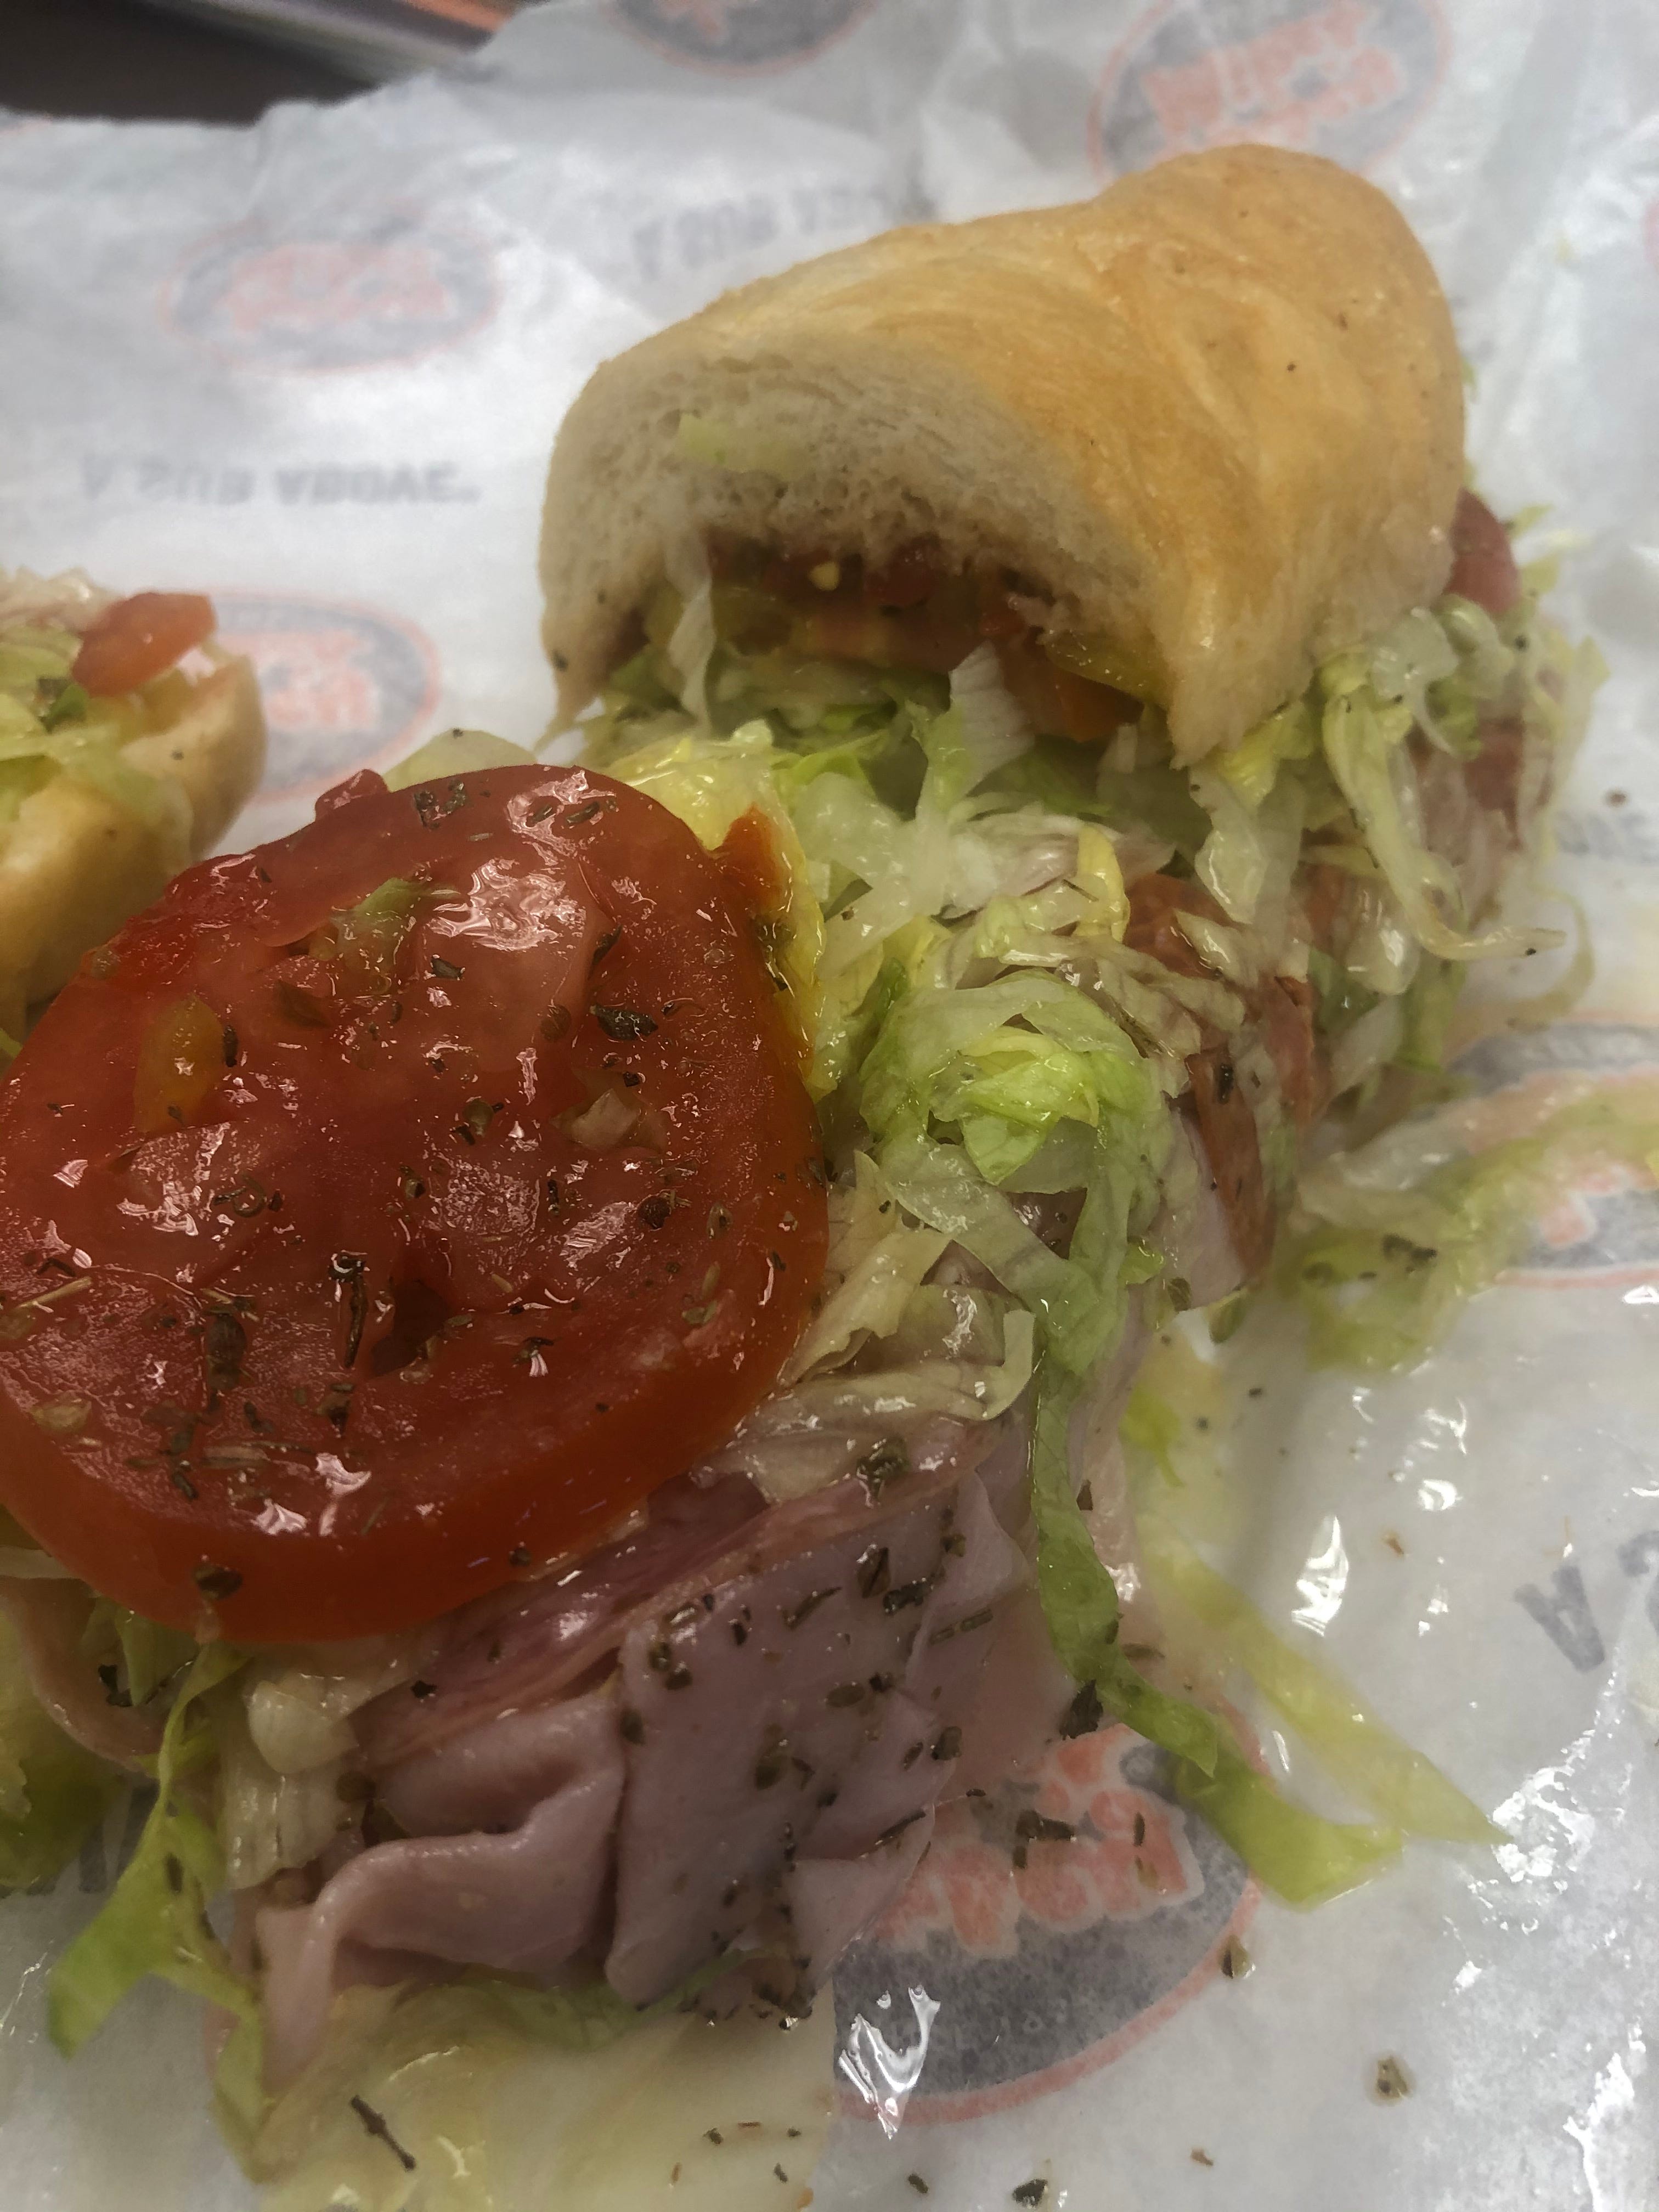 jersey mike meatball sub